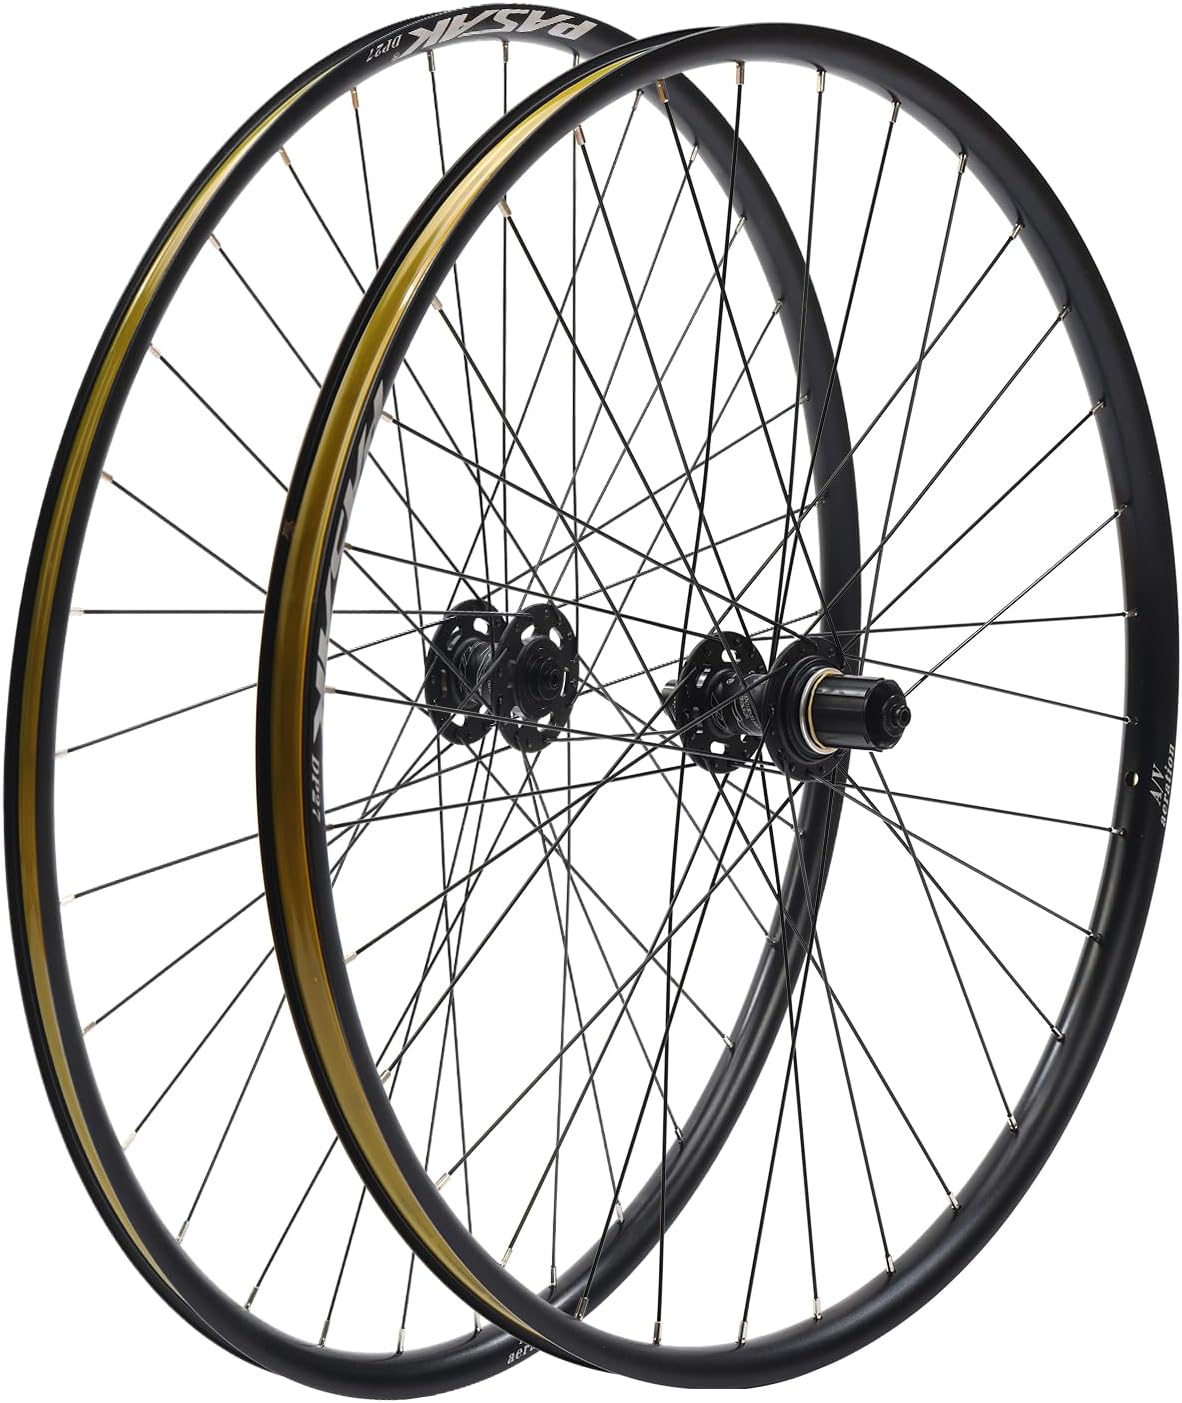 Tubeless ready 27mm Double Wall CL bike Wheelset 32H Disc Brake, QR, 12 speed hub, all sizes - $125 from Amazon